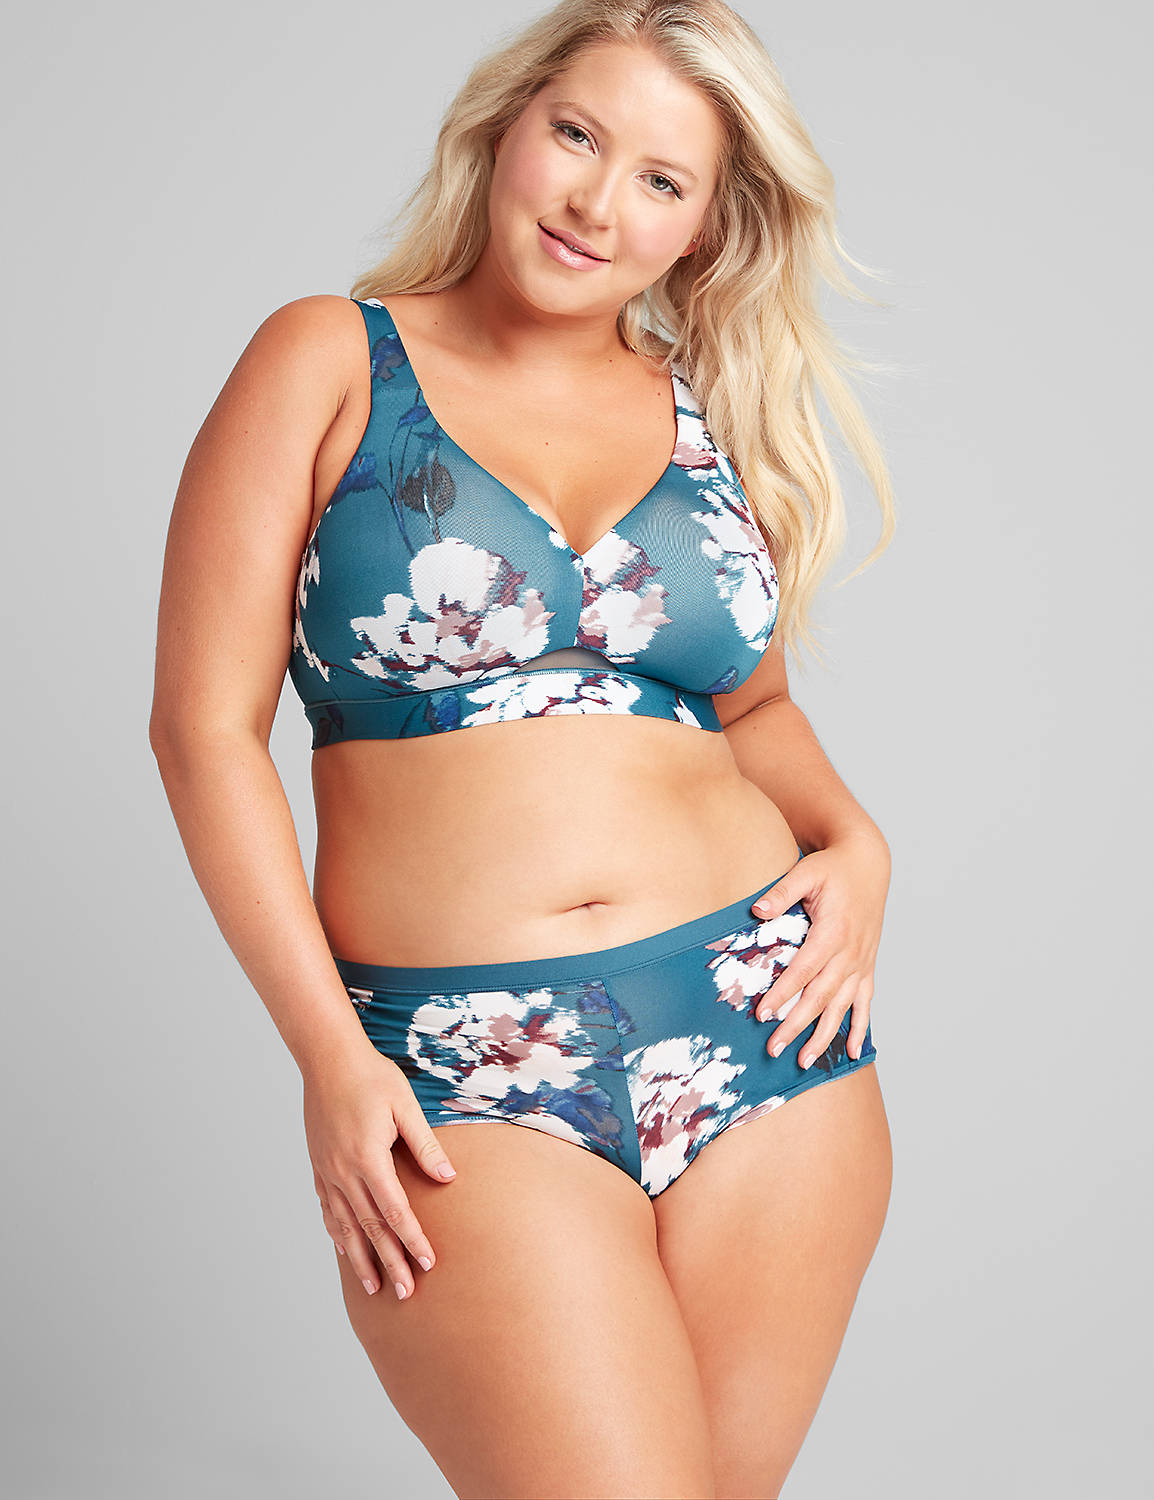 Smooth Modern No Wire - Darted 1115678 T:Dusk Floral_Reduced_Legion Blue_CF20205:38F Product Image 1